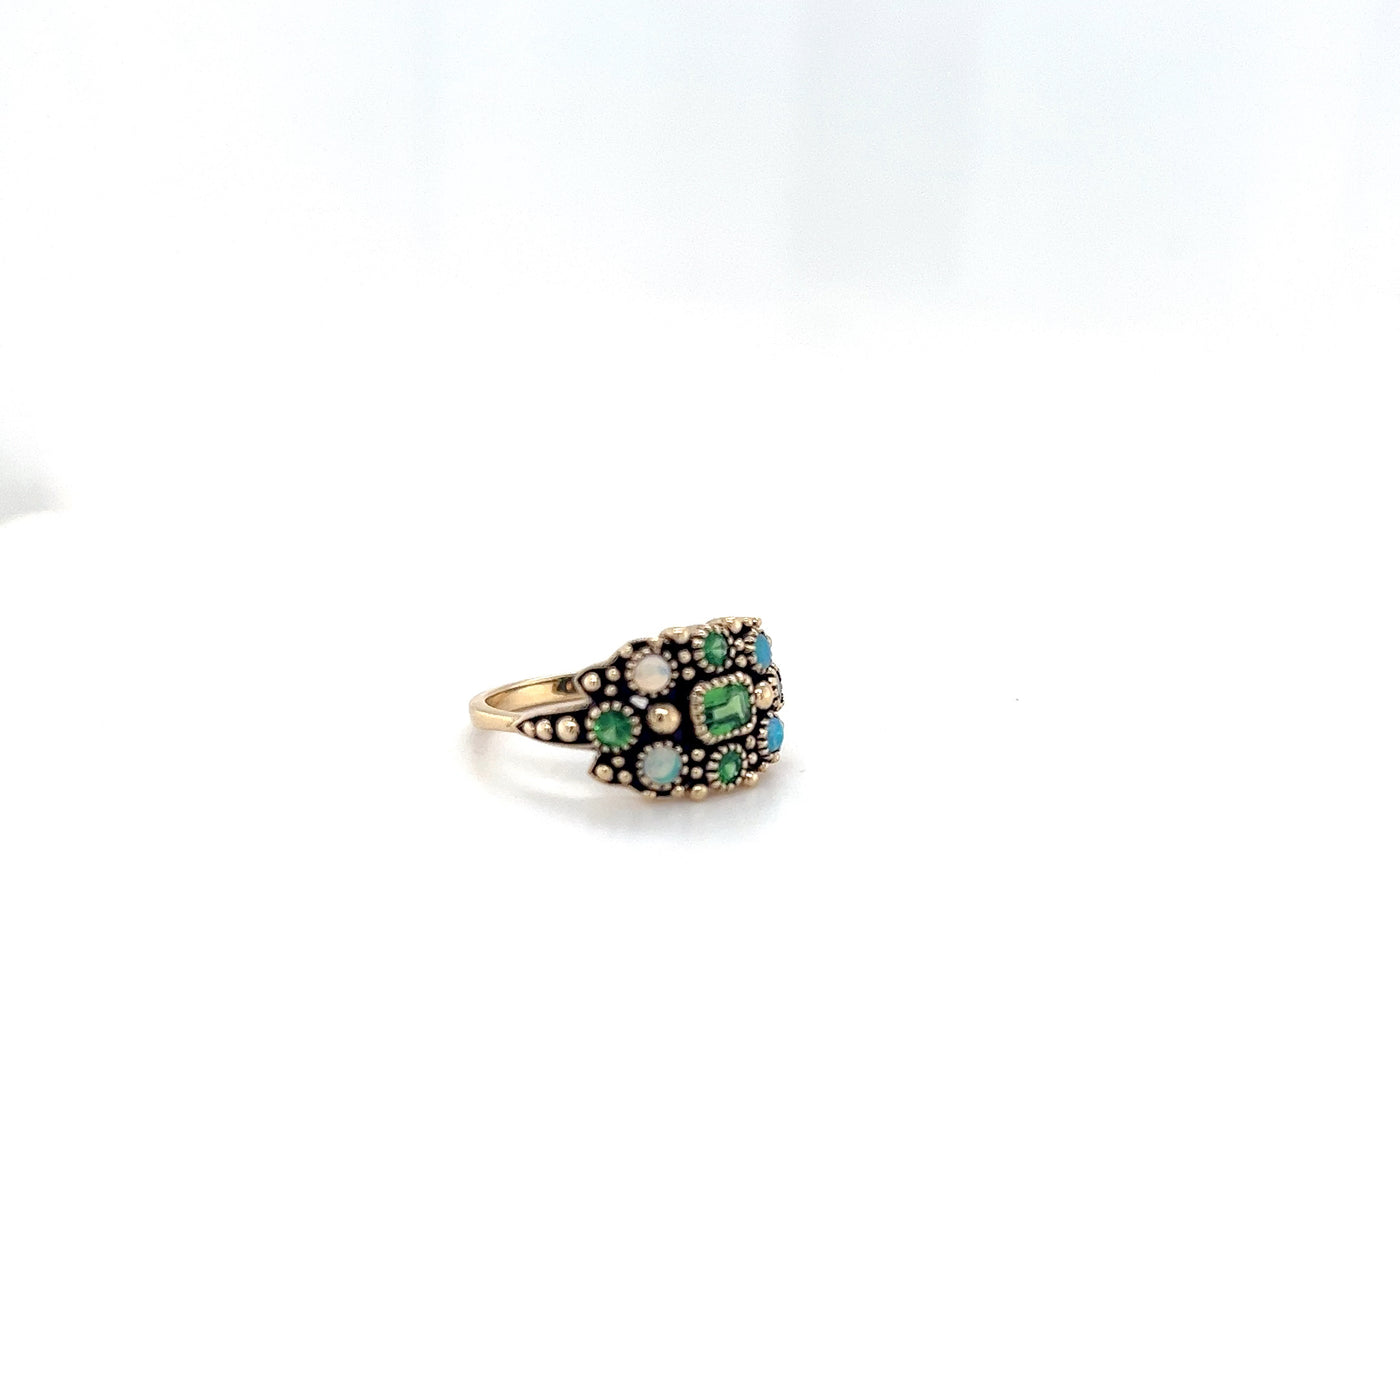 9 Carat Yellow Gold Ring with Tsavorite and Opal.